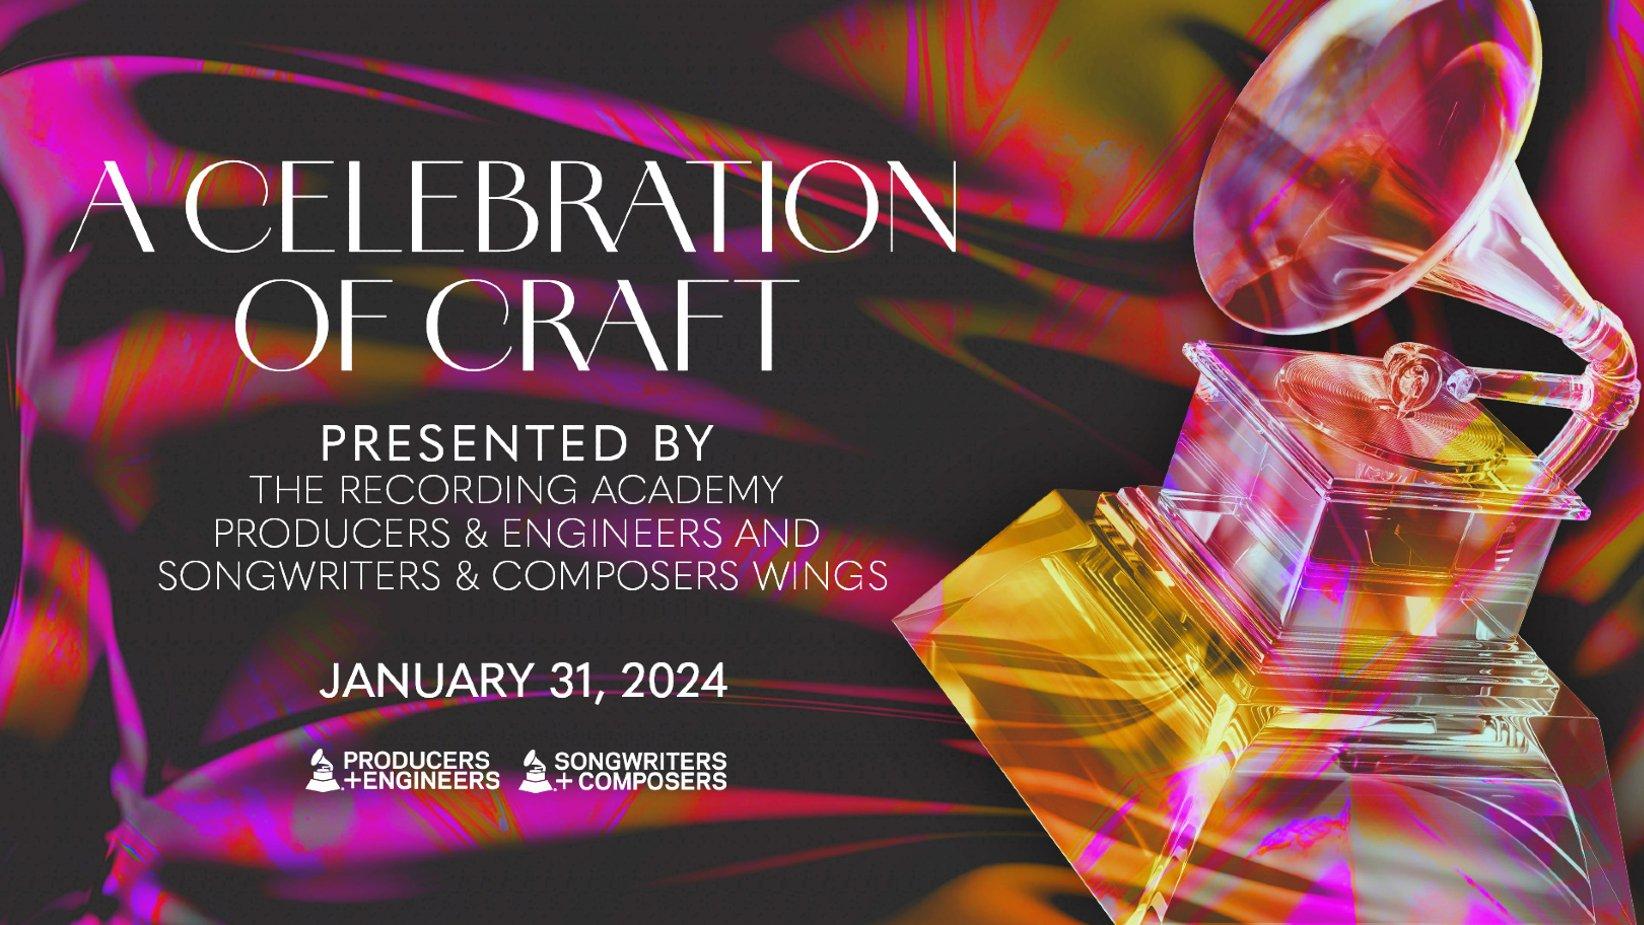 “A Celebration of Craft,” the first-ever event presented by the Recording Academy’s two craft wings, will kick off GRAMMY Week 2024 and salute producer/engineer and seven-time GRAMMY winner Leslie Ann Jones on Wednesday, Jan. 31.